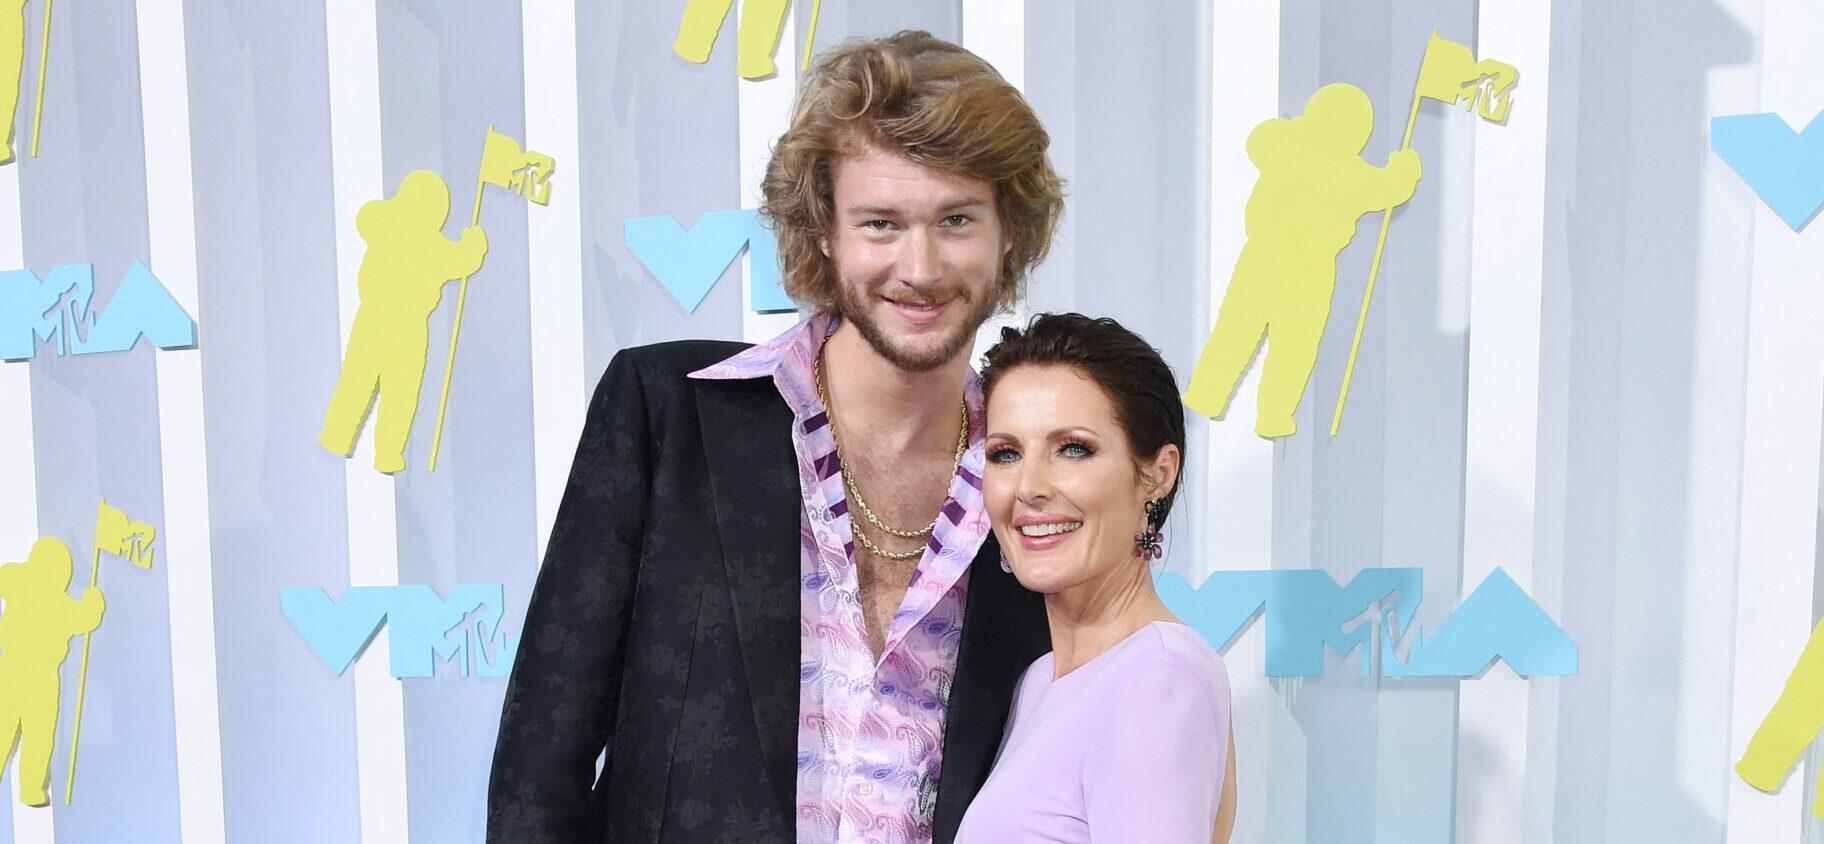 Addison Rae’s Mom & Yung Gravy End ‘Chaotic’ & ‘Hectic’ Romance